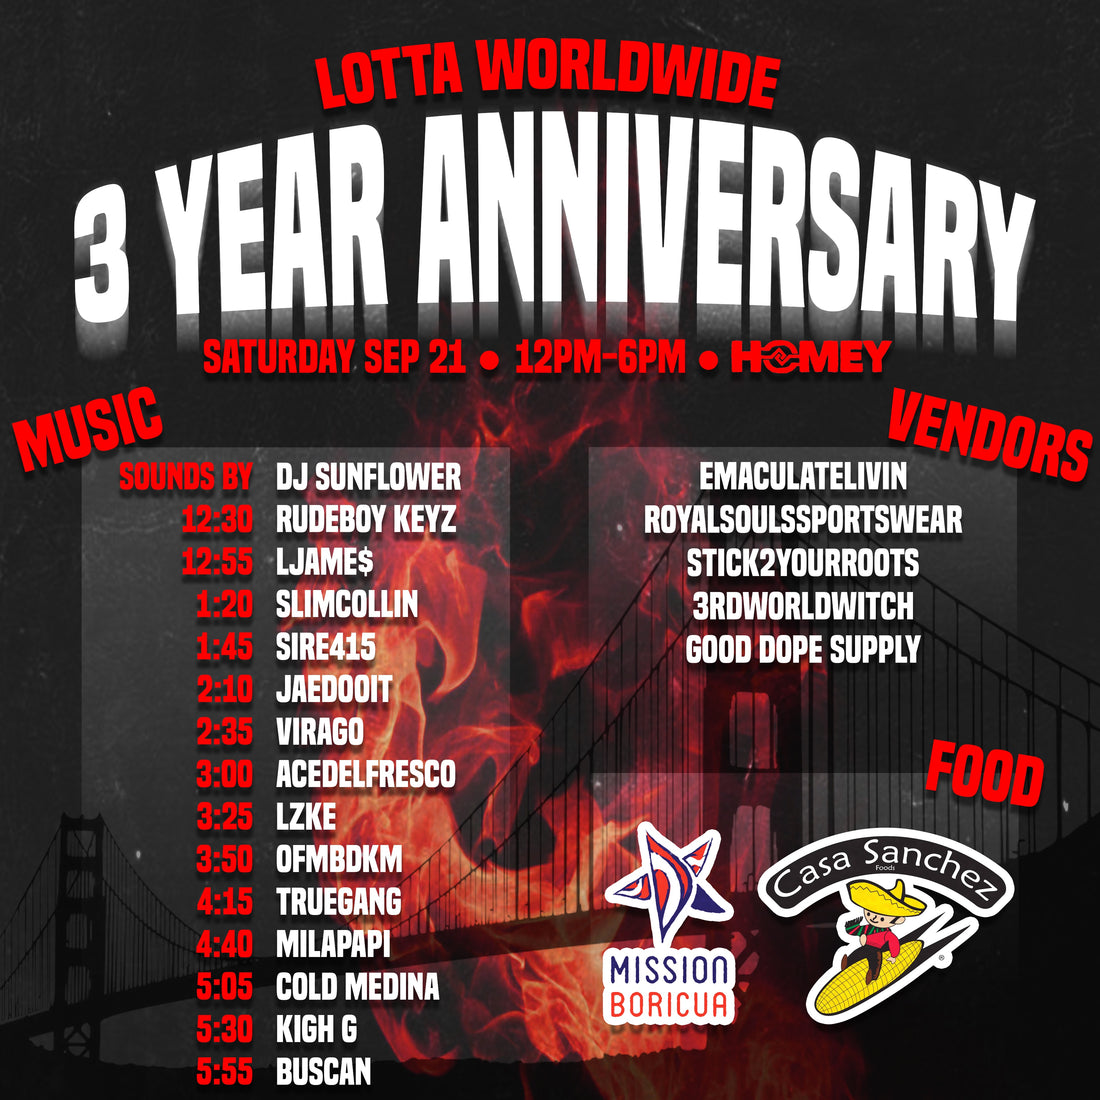 LOTTAWORLDWIDE 3 Year Anniversary Party - The Marathon Continues ...